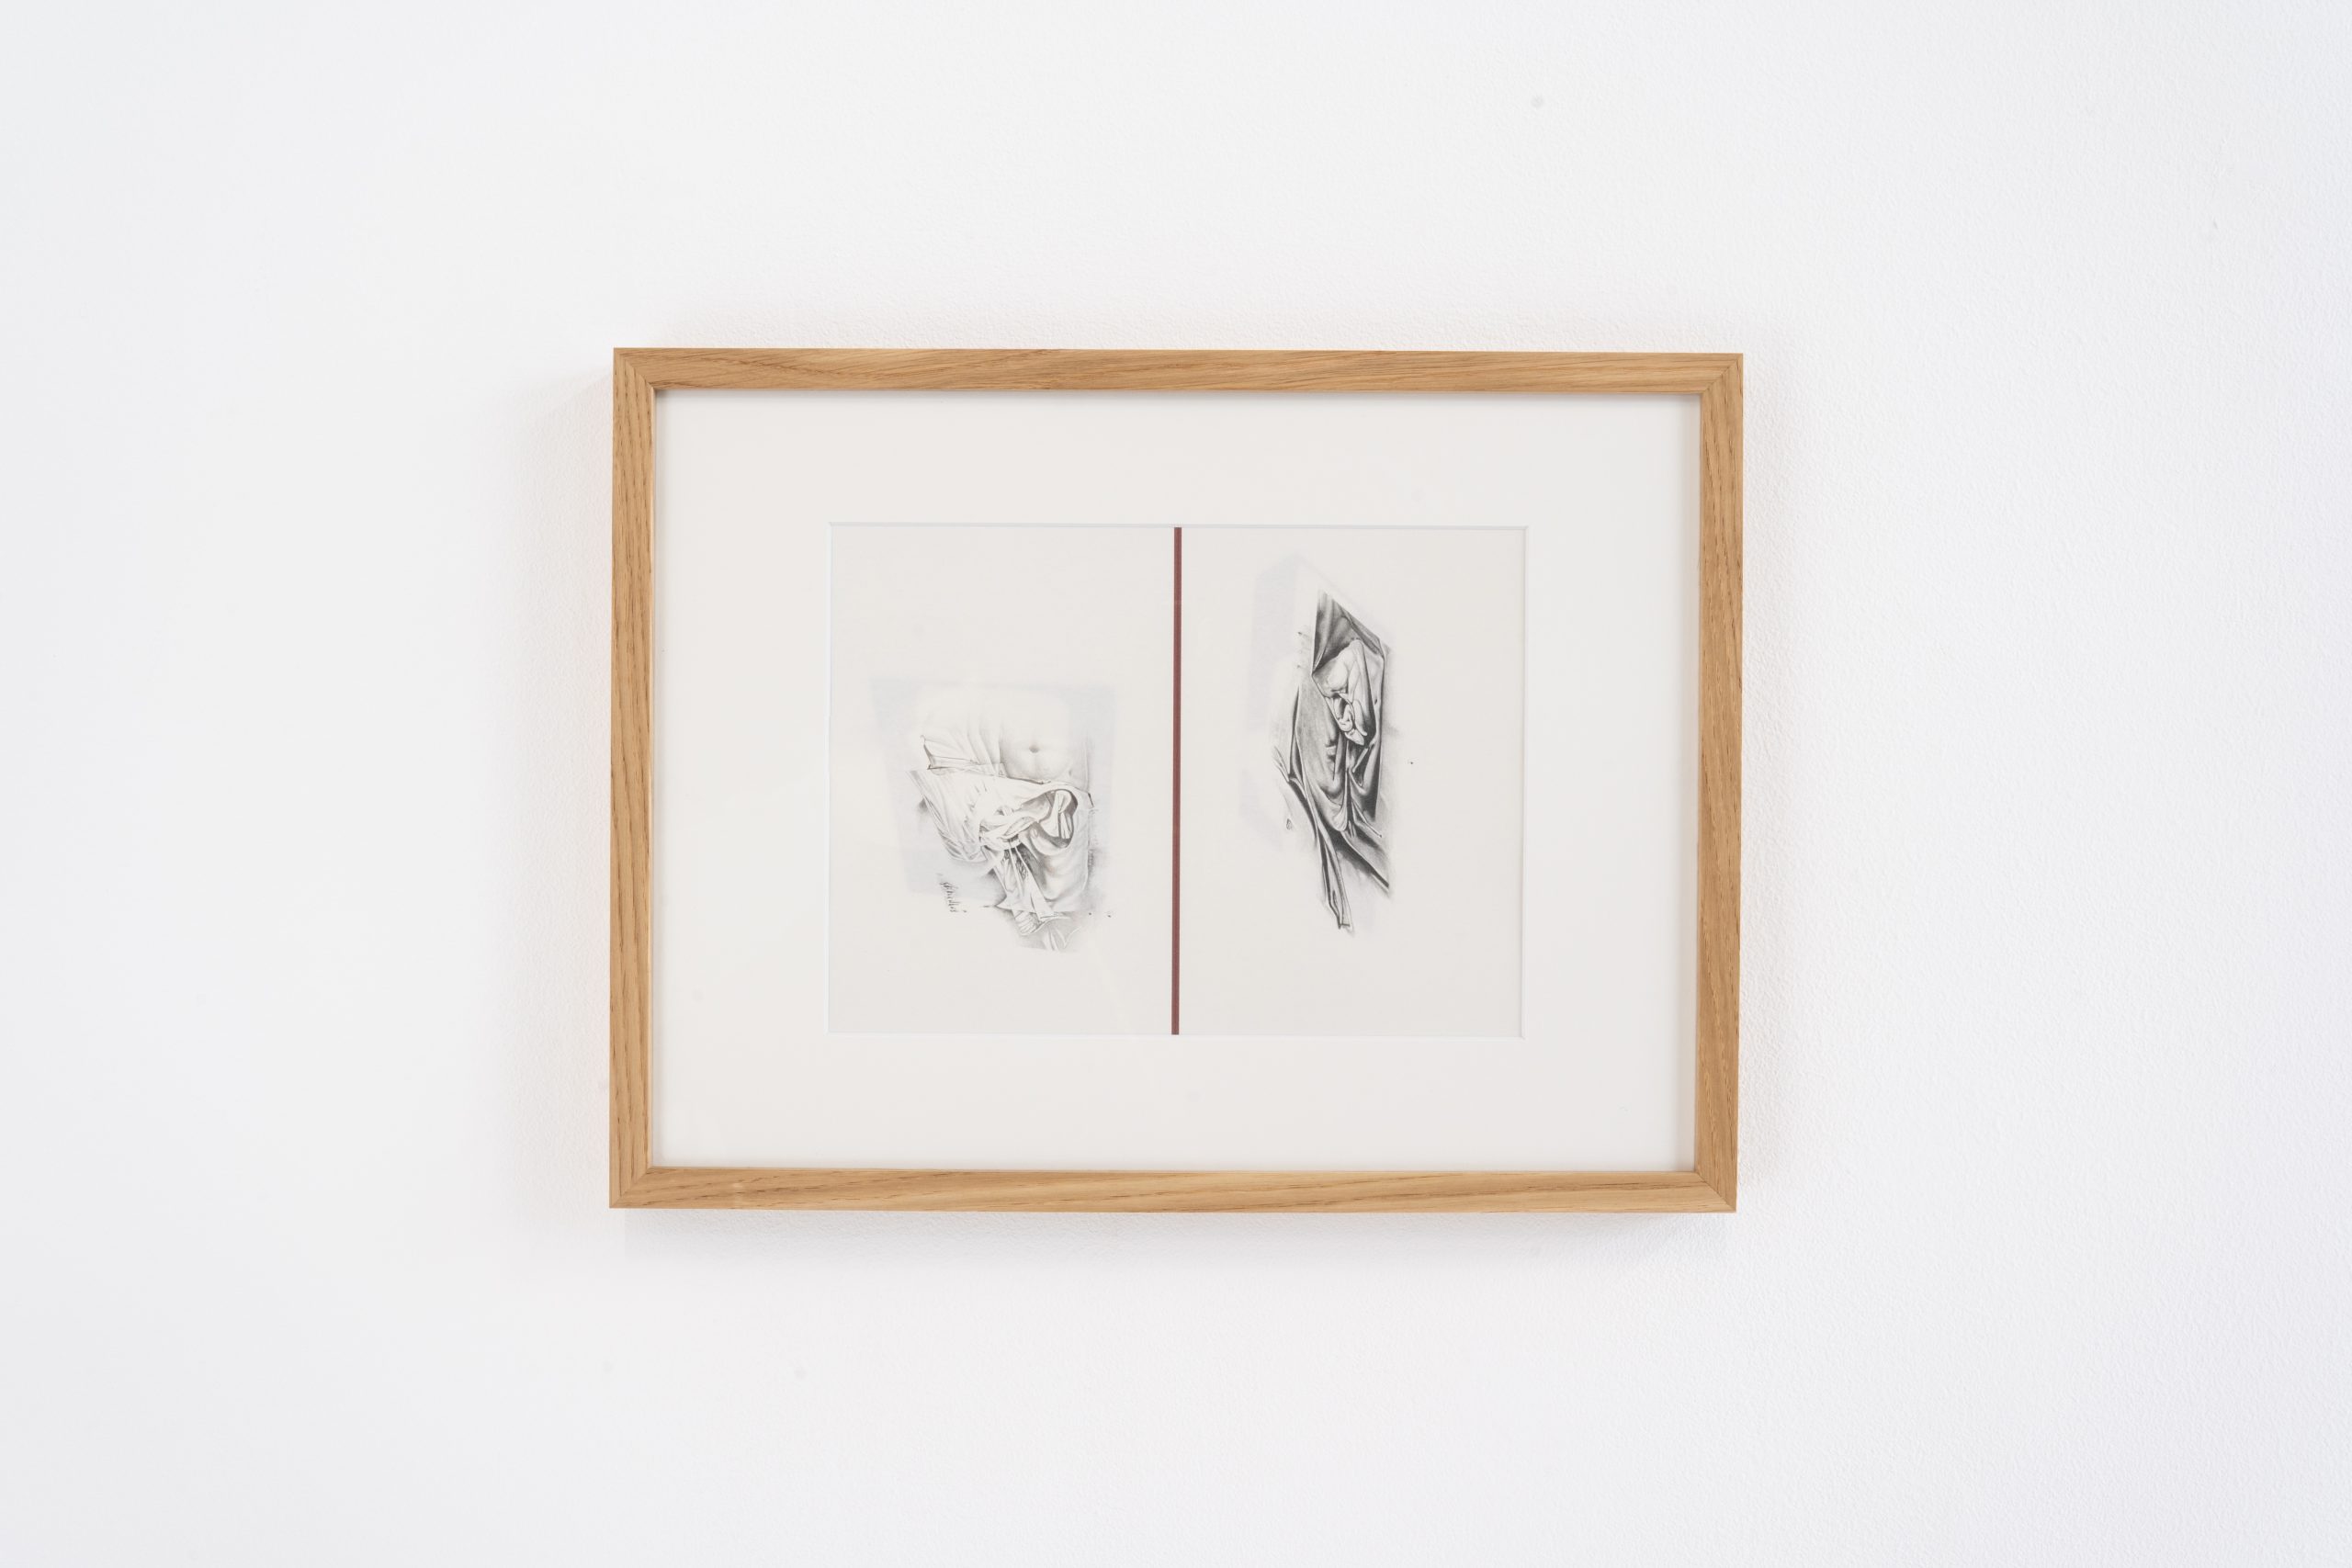 Swooning diptych, 2021, in collaboration with Oriana Fenwick. Graphite and pigment ink print, 40 x 30 cm. Drawing of distorted forms in front of a pale background with a red line separating the two forms.